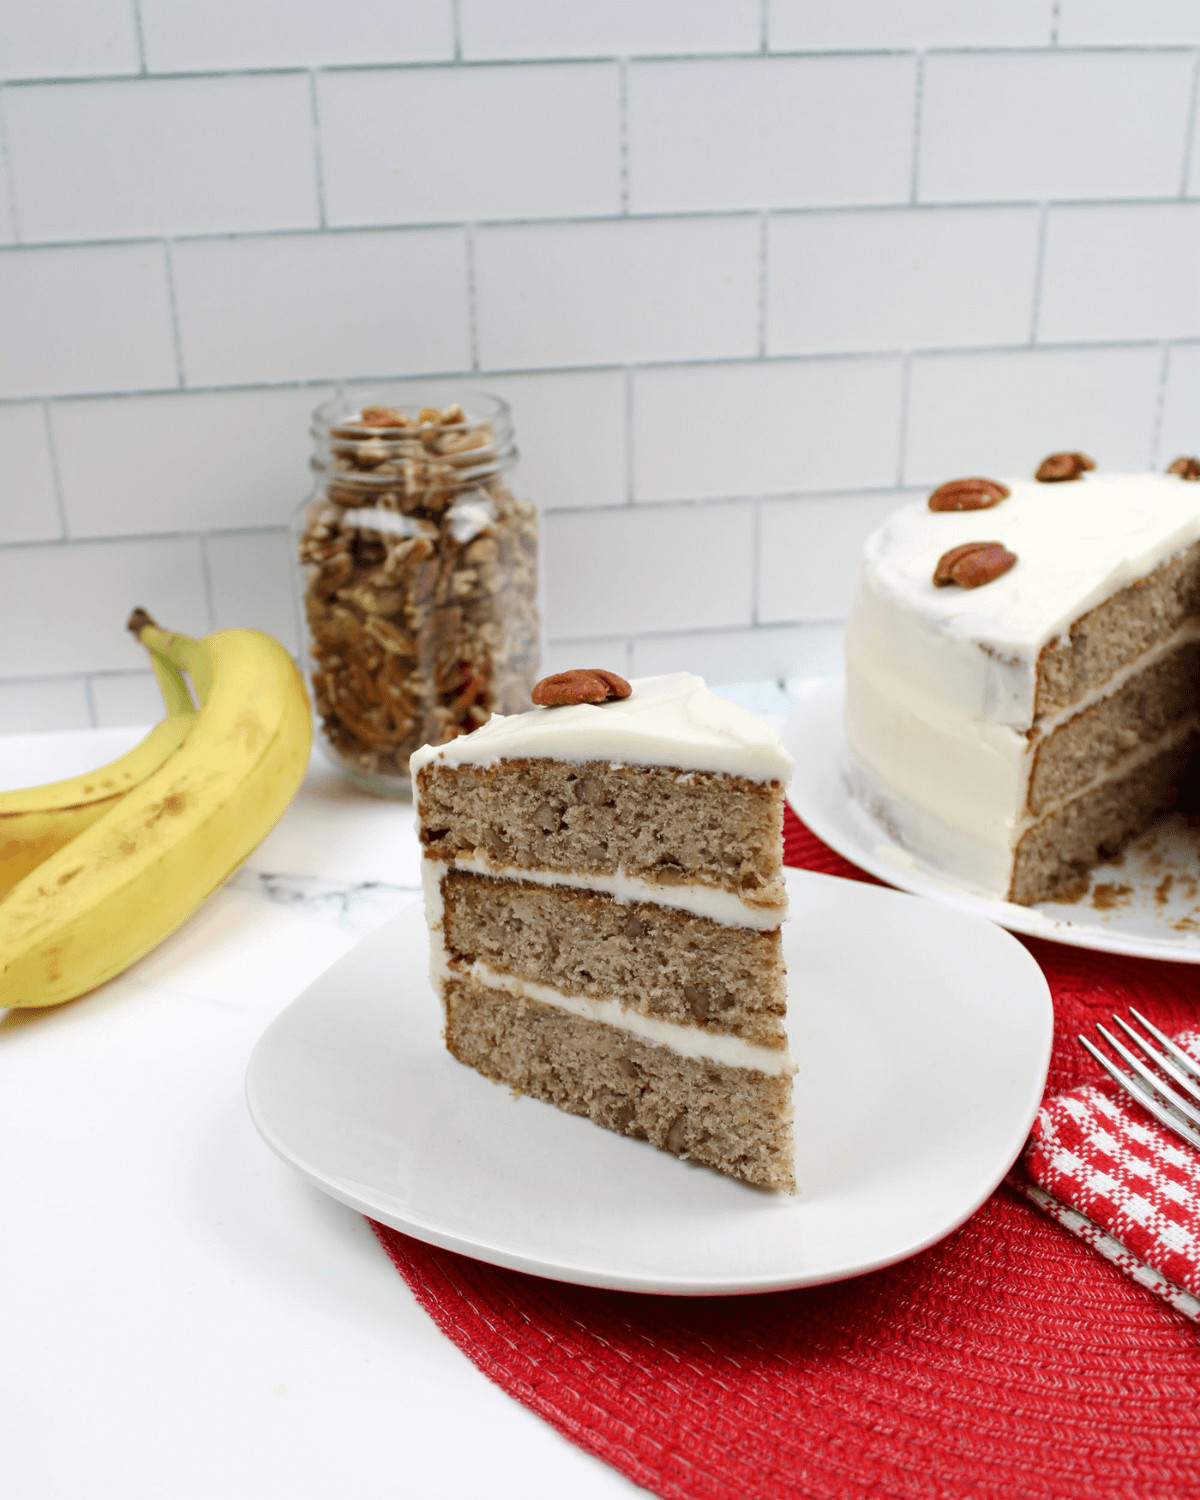 A slice of the Old fashioned hummingbird cake recipe with a whole cake in the background.